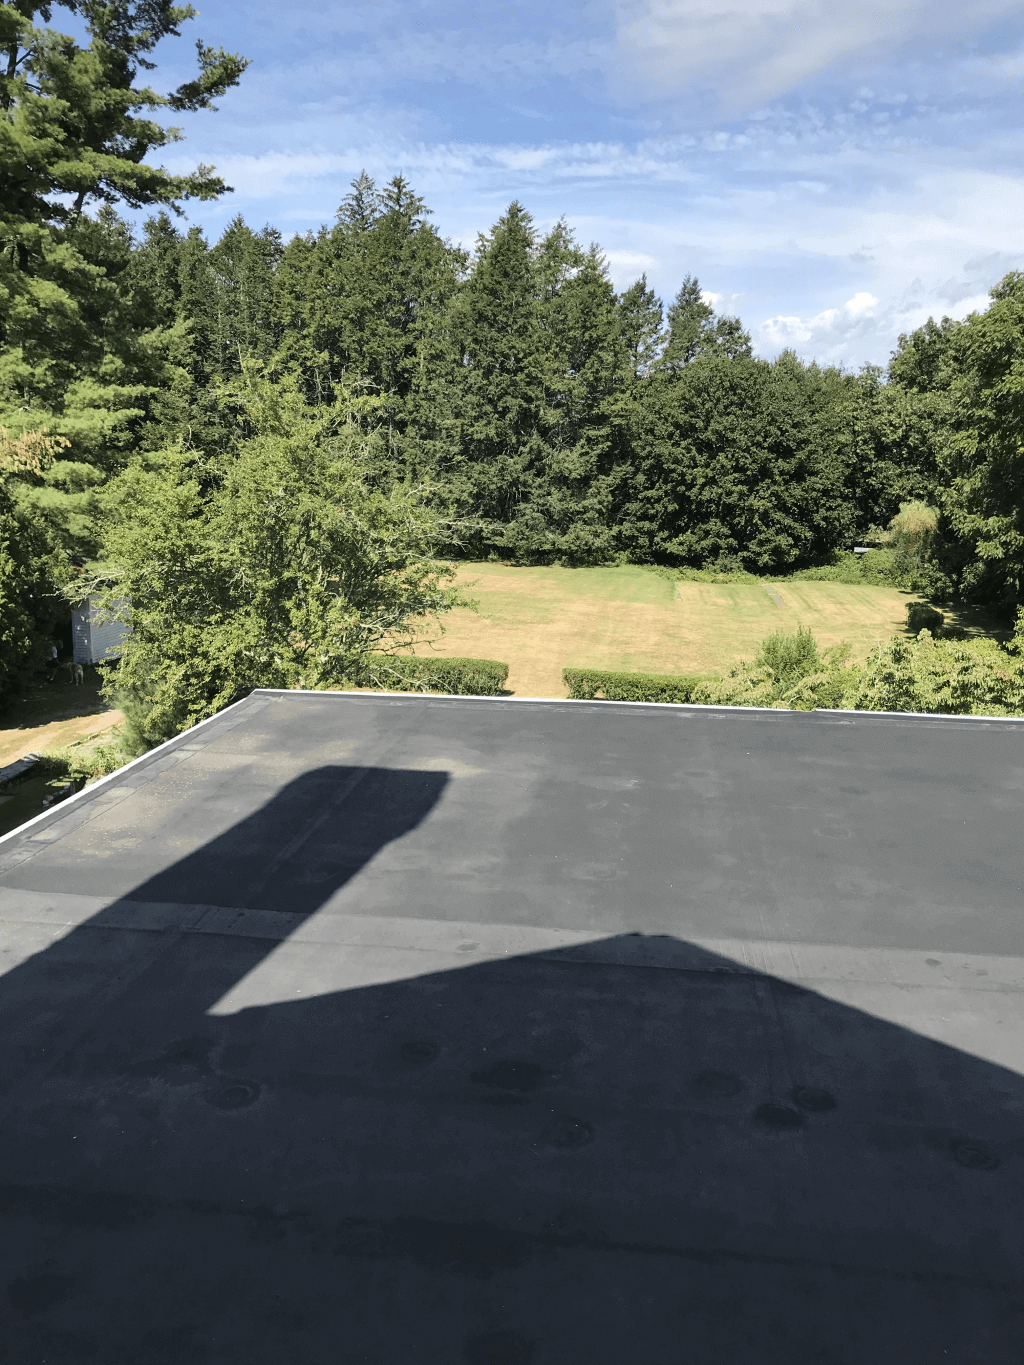 Rubber Roof prior to Roof Deck Construction near Boston MA